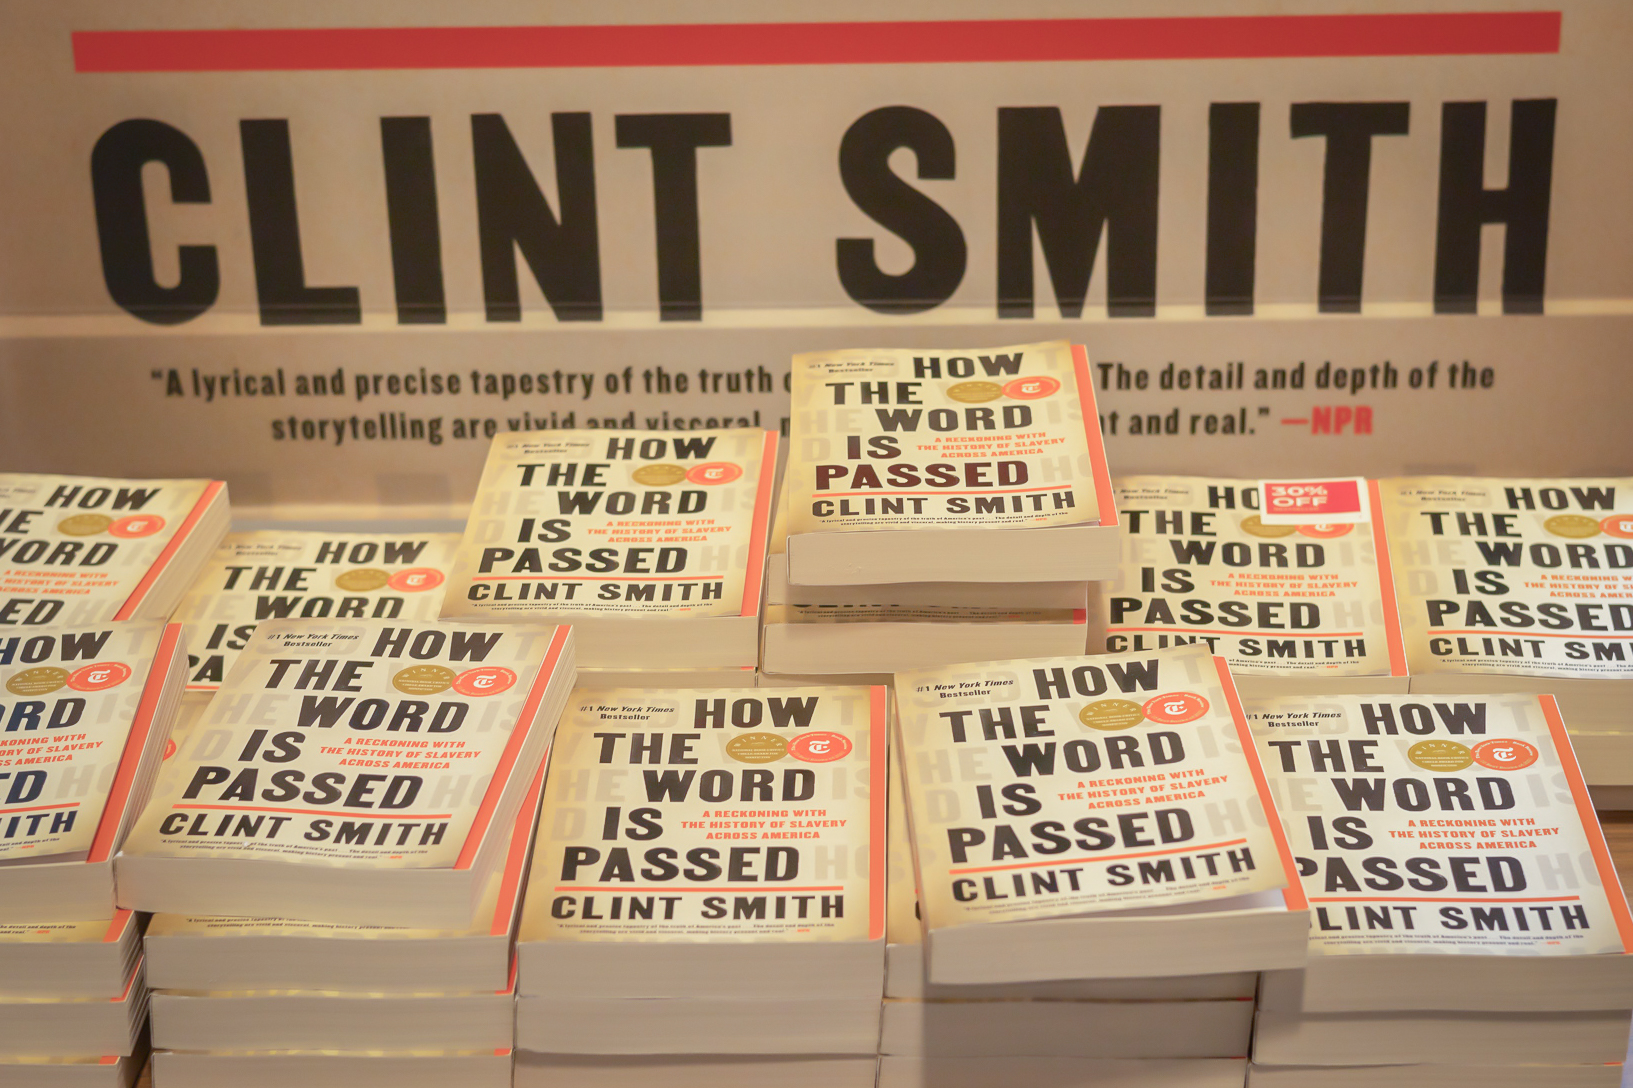 A pile of Clint Smith’s book “How the Word is Passed” displayed in the N.Y.U. Bookstore. Behind the pile is a board with Smith’s name written on it.